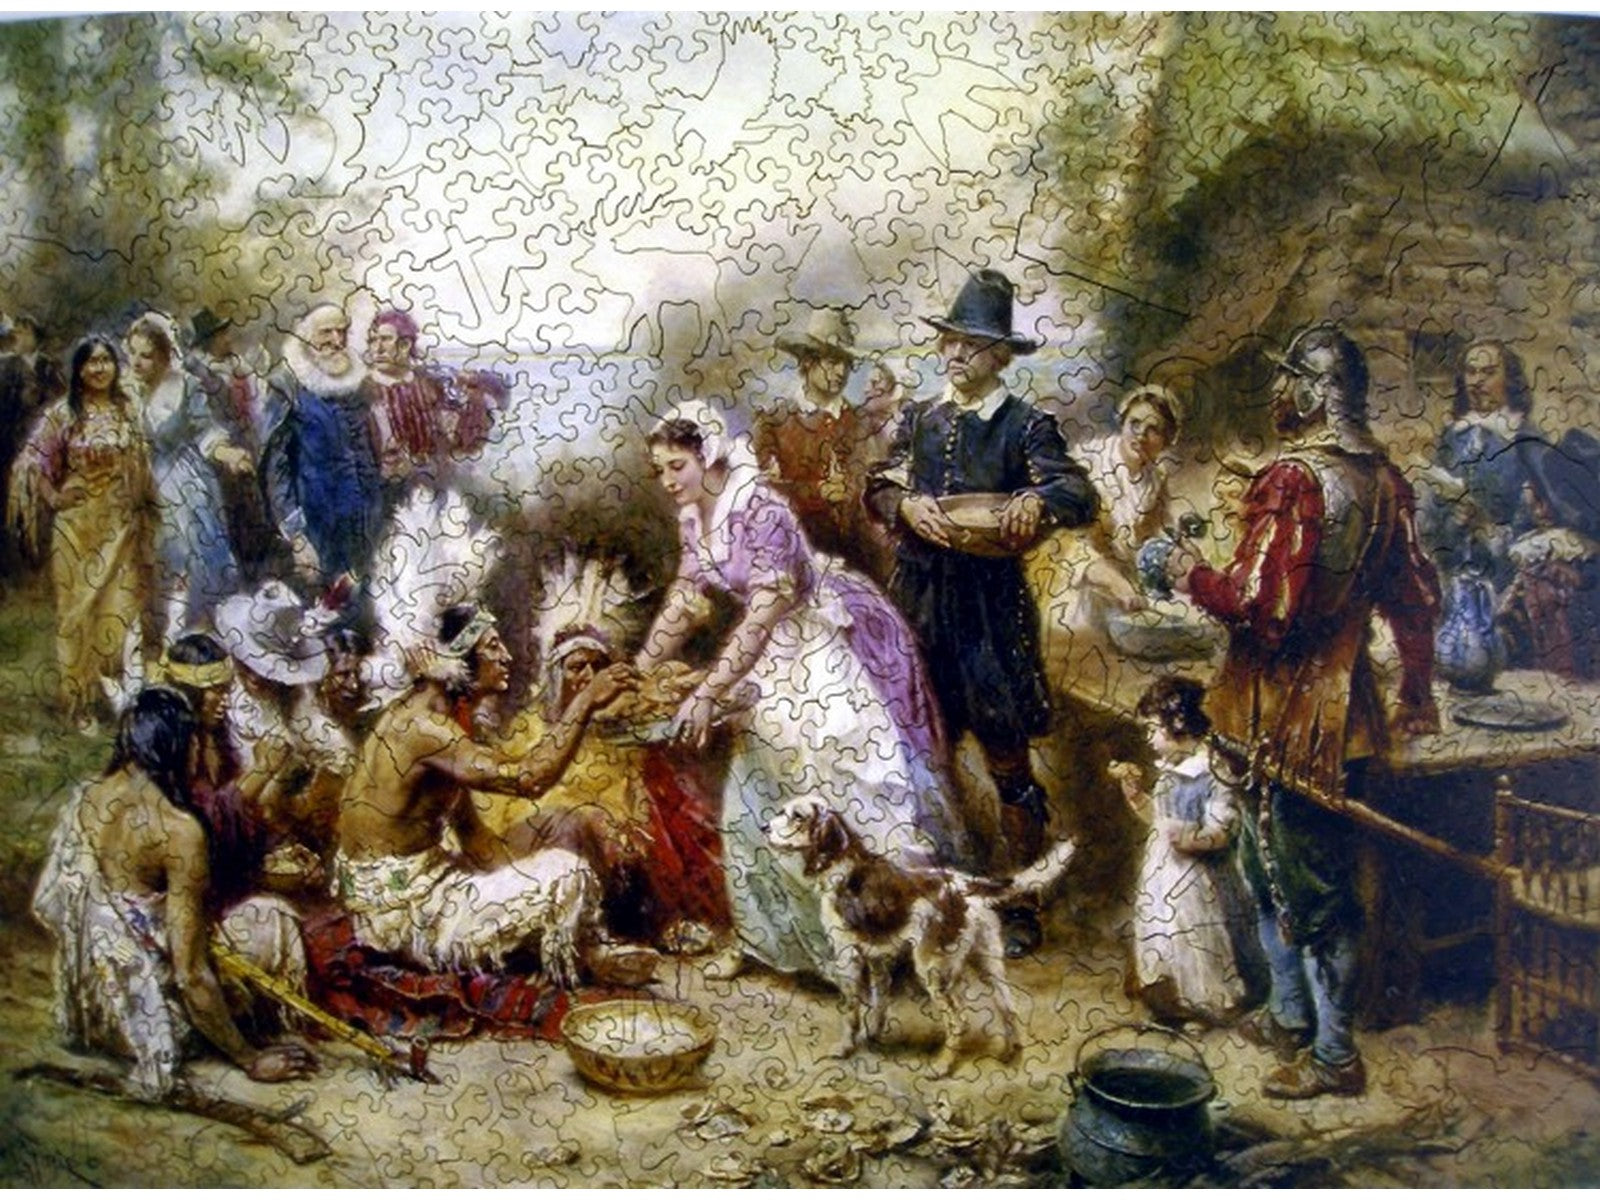 pilgrims and indians wallpaper